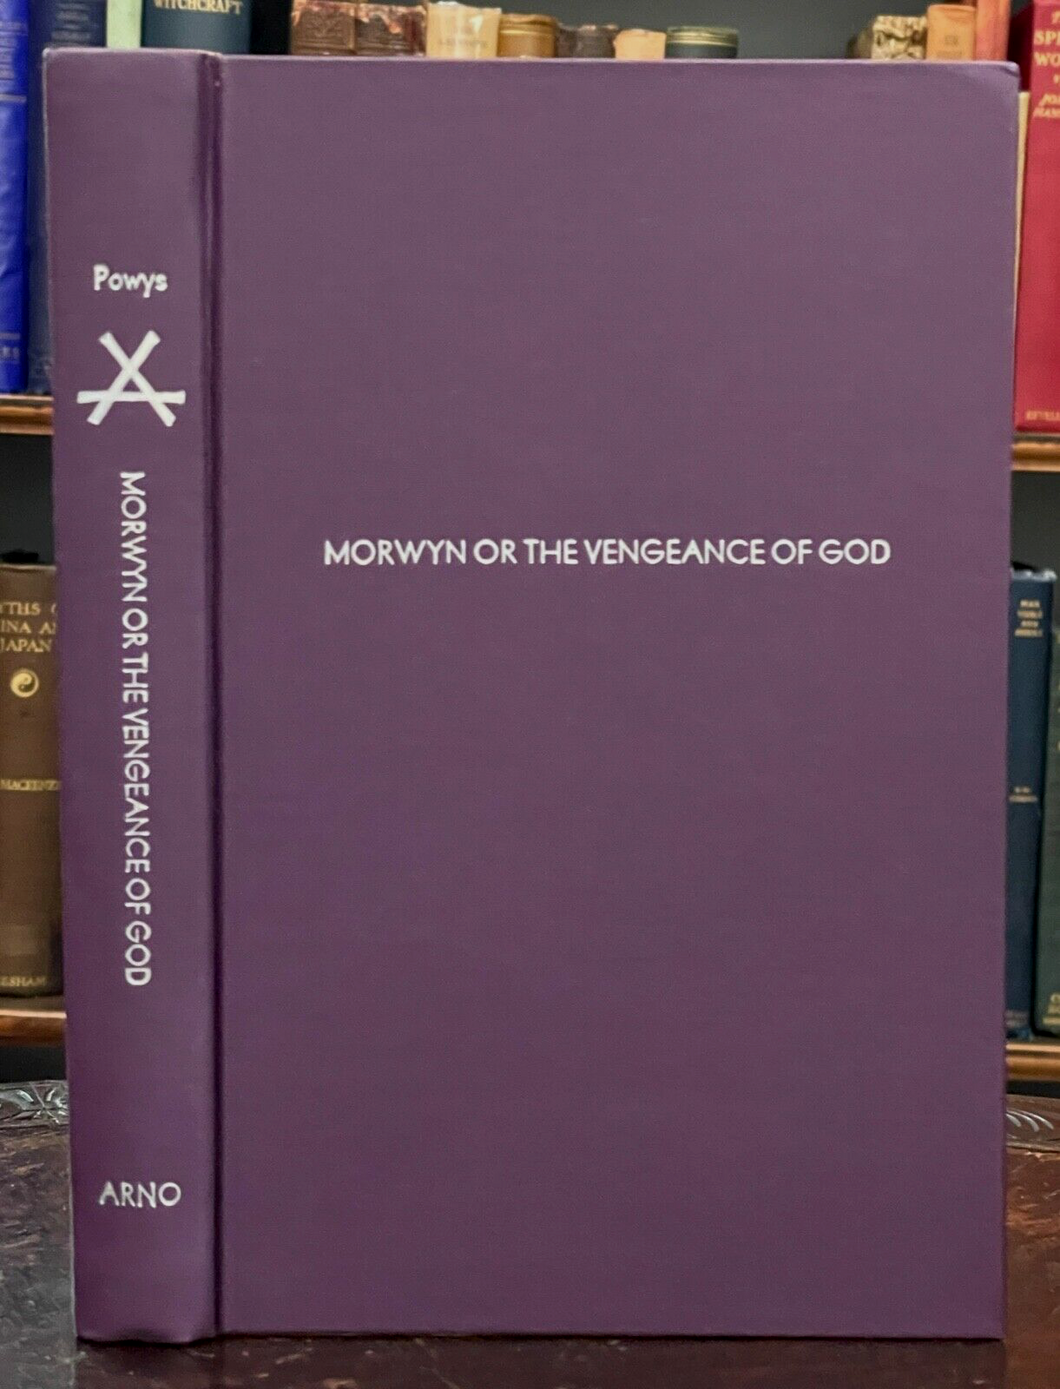 MORWYN, OR THE VENGEANCE OF GOD - Arno Press/Powys, 1976 DESCENT TO HELL TORTURE